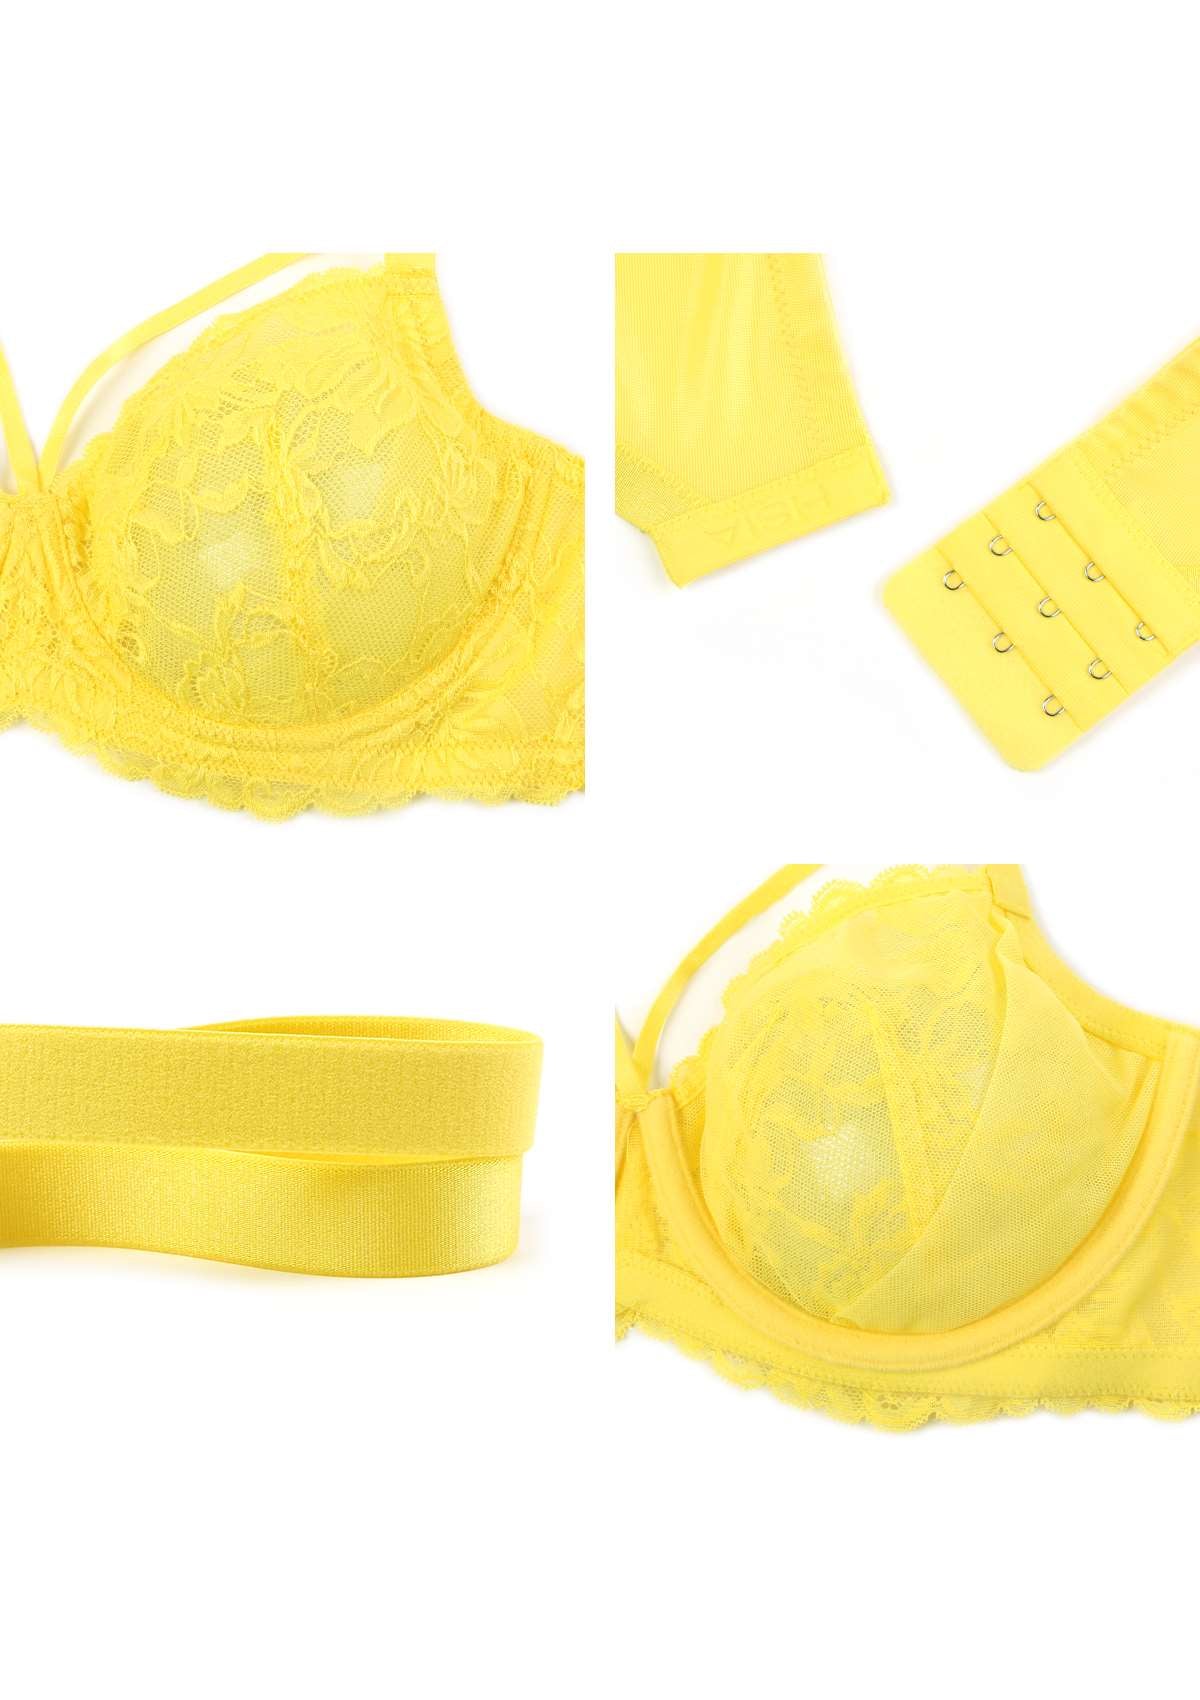 HSIA Unlined Lace Mesh Minimizer Bra For Large Breasts, Full Coverage - Bright Yellow / 38 / D